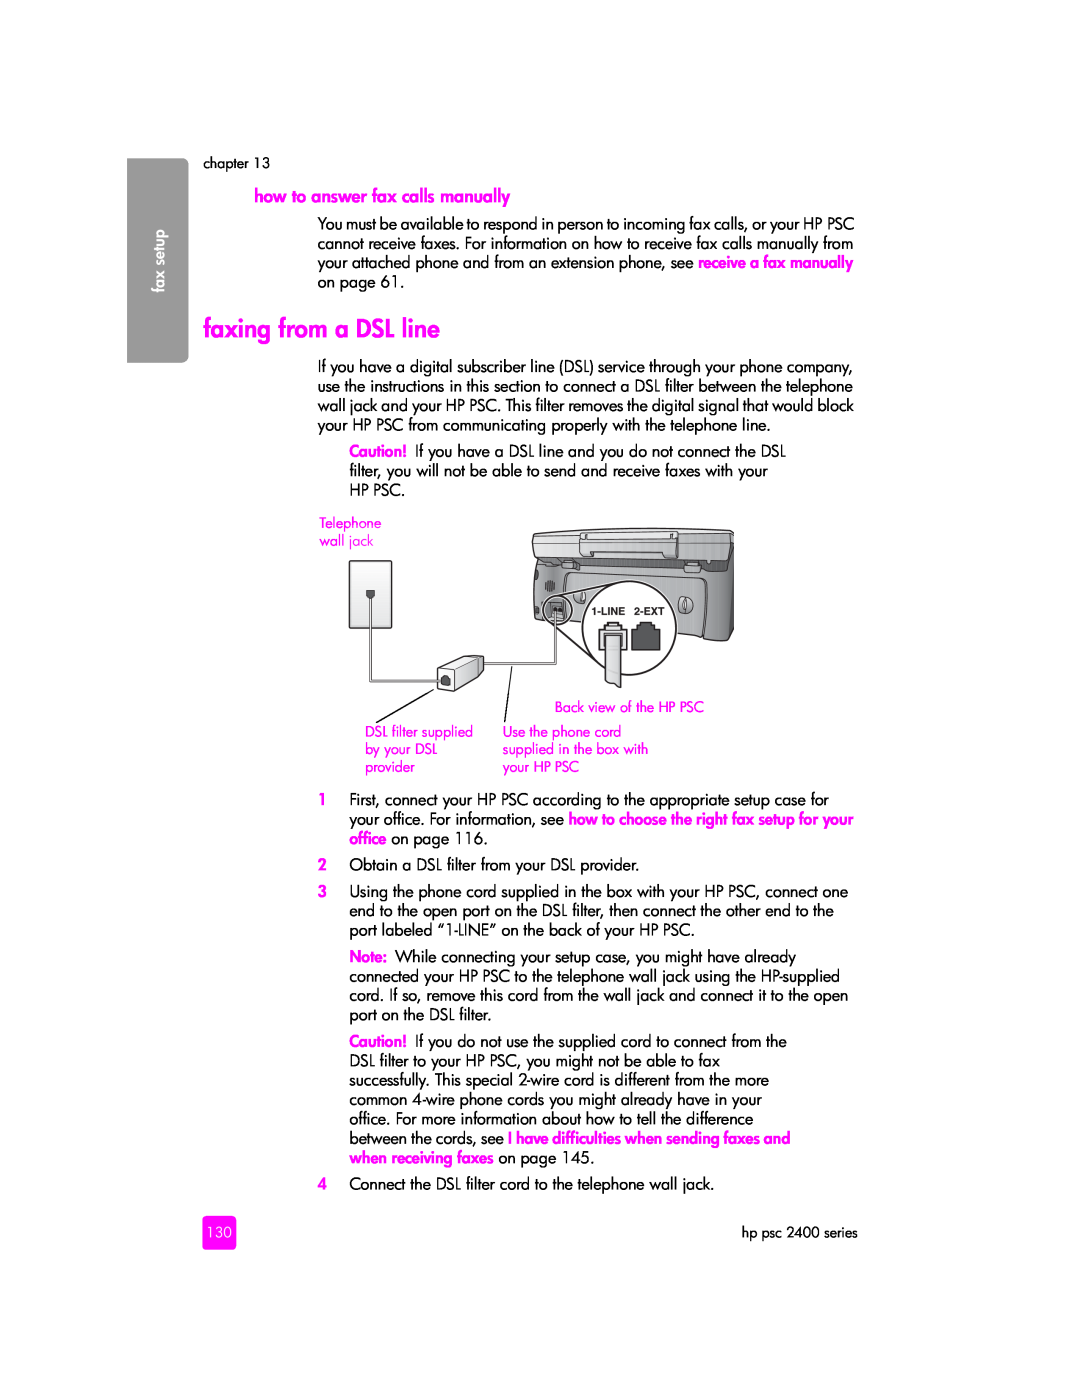 HP 2400 2410v (Q3089A) faxing from a DSL line, how to answer fax calls manually, fax setup, Back view of the HP PSC 